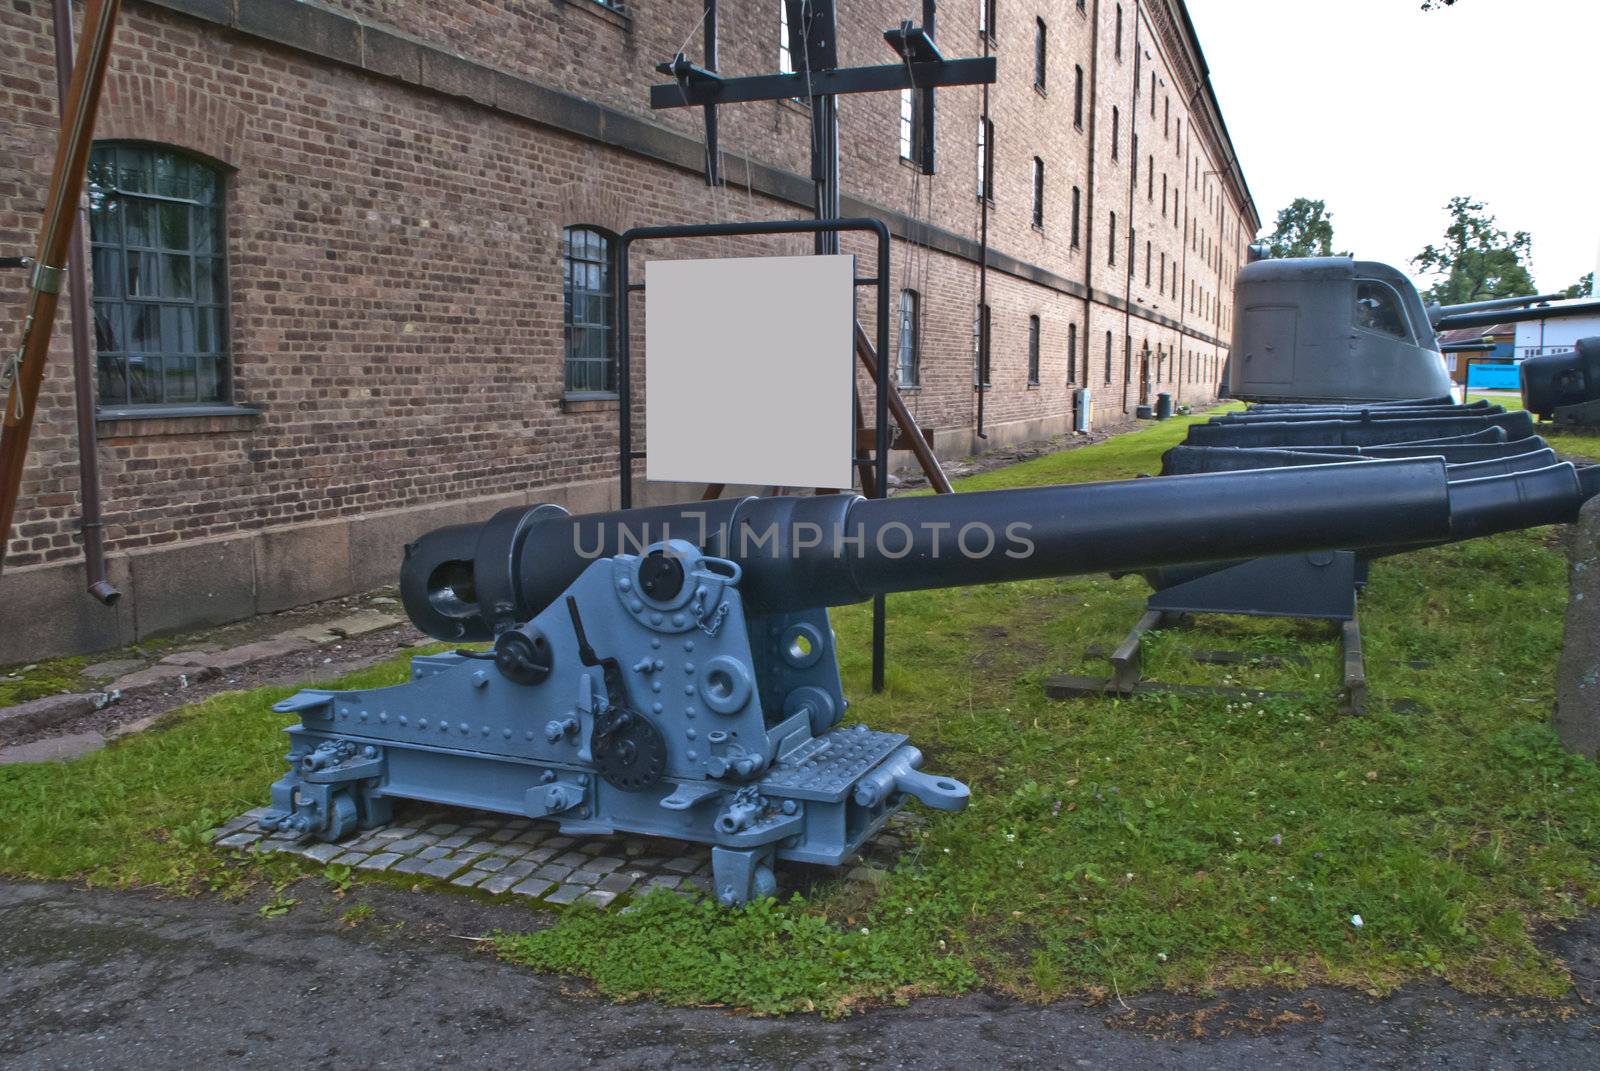 cannons, karljohansvern (karljohansvern orlogsstasjon, kjv) in horten was the main base for the royal norwegian navy from 1819 to 1963, it was first called hortens verft, and later marinens hovedværft until king oscar I named it carljohansværn værft in 1854 (after his father karl johan), it was the site of the navy main yard, navy air plane factory, navy museum, navy schools and the forts norske løve and citadellet.